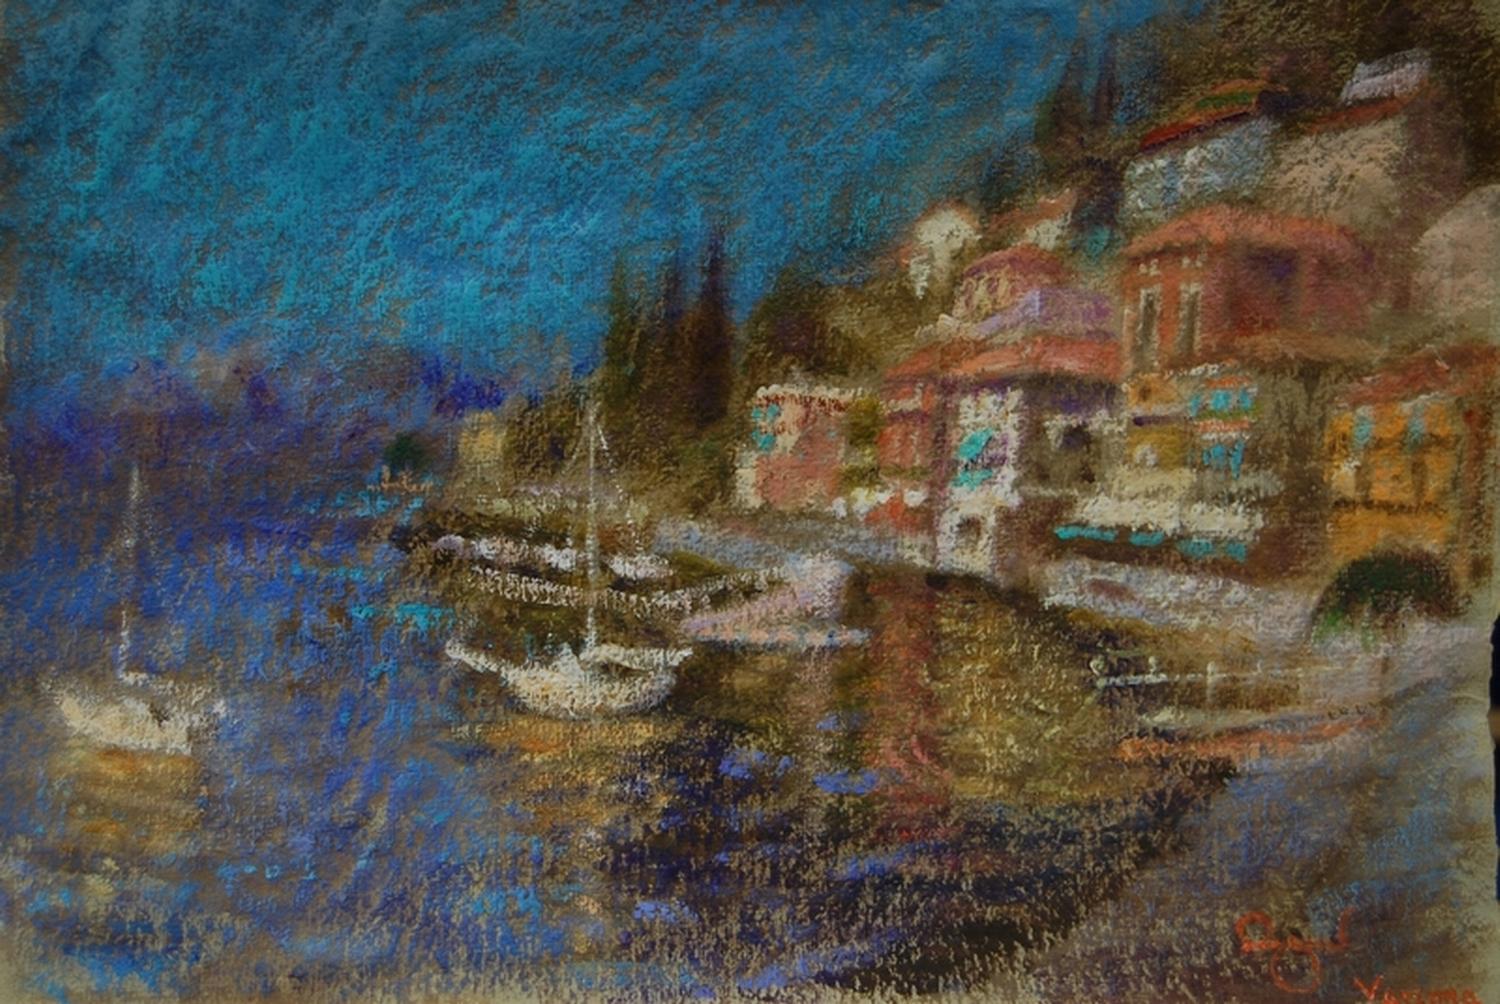 Rene Jerome Legrand Landscape Painting - The Old Harbour, Varenna - Lake Como Italy